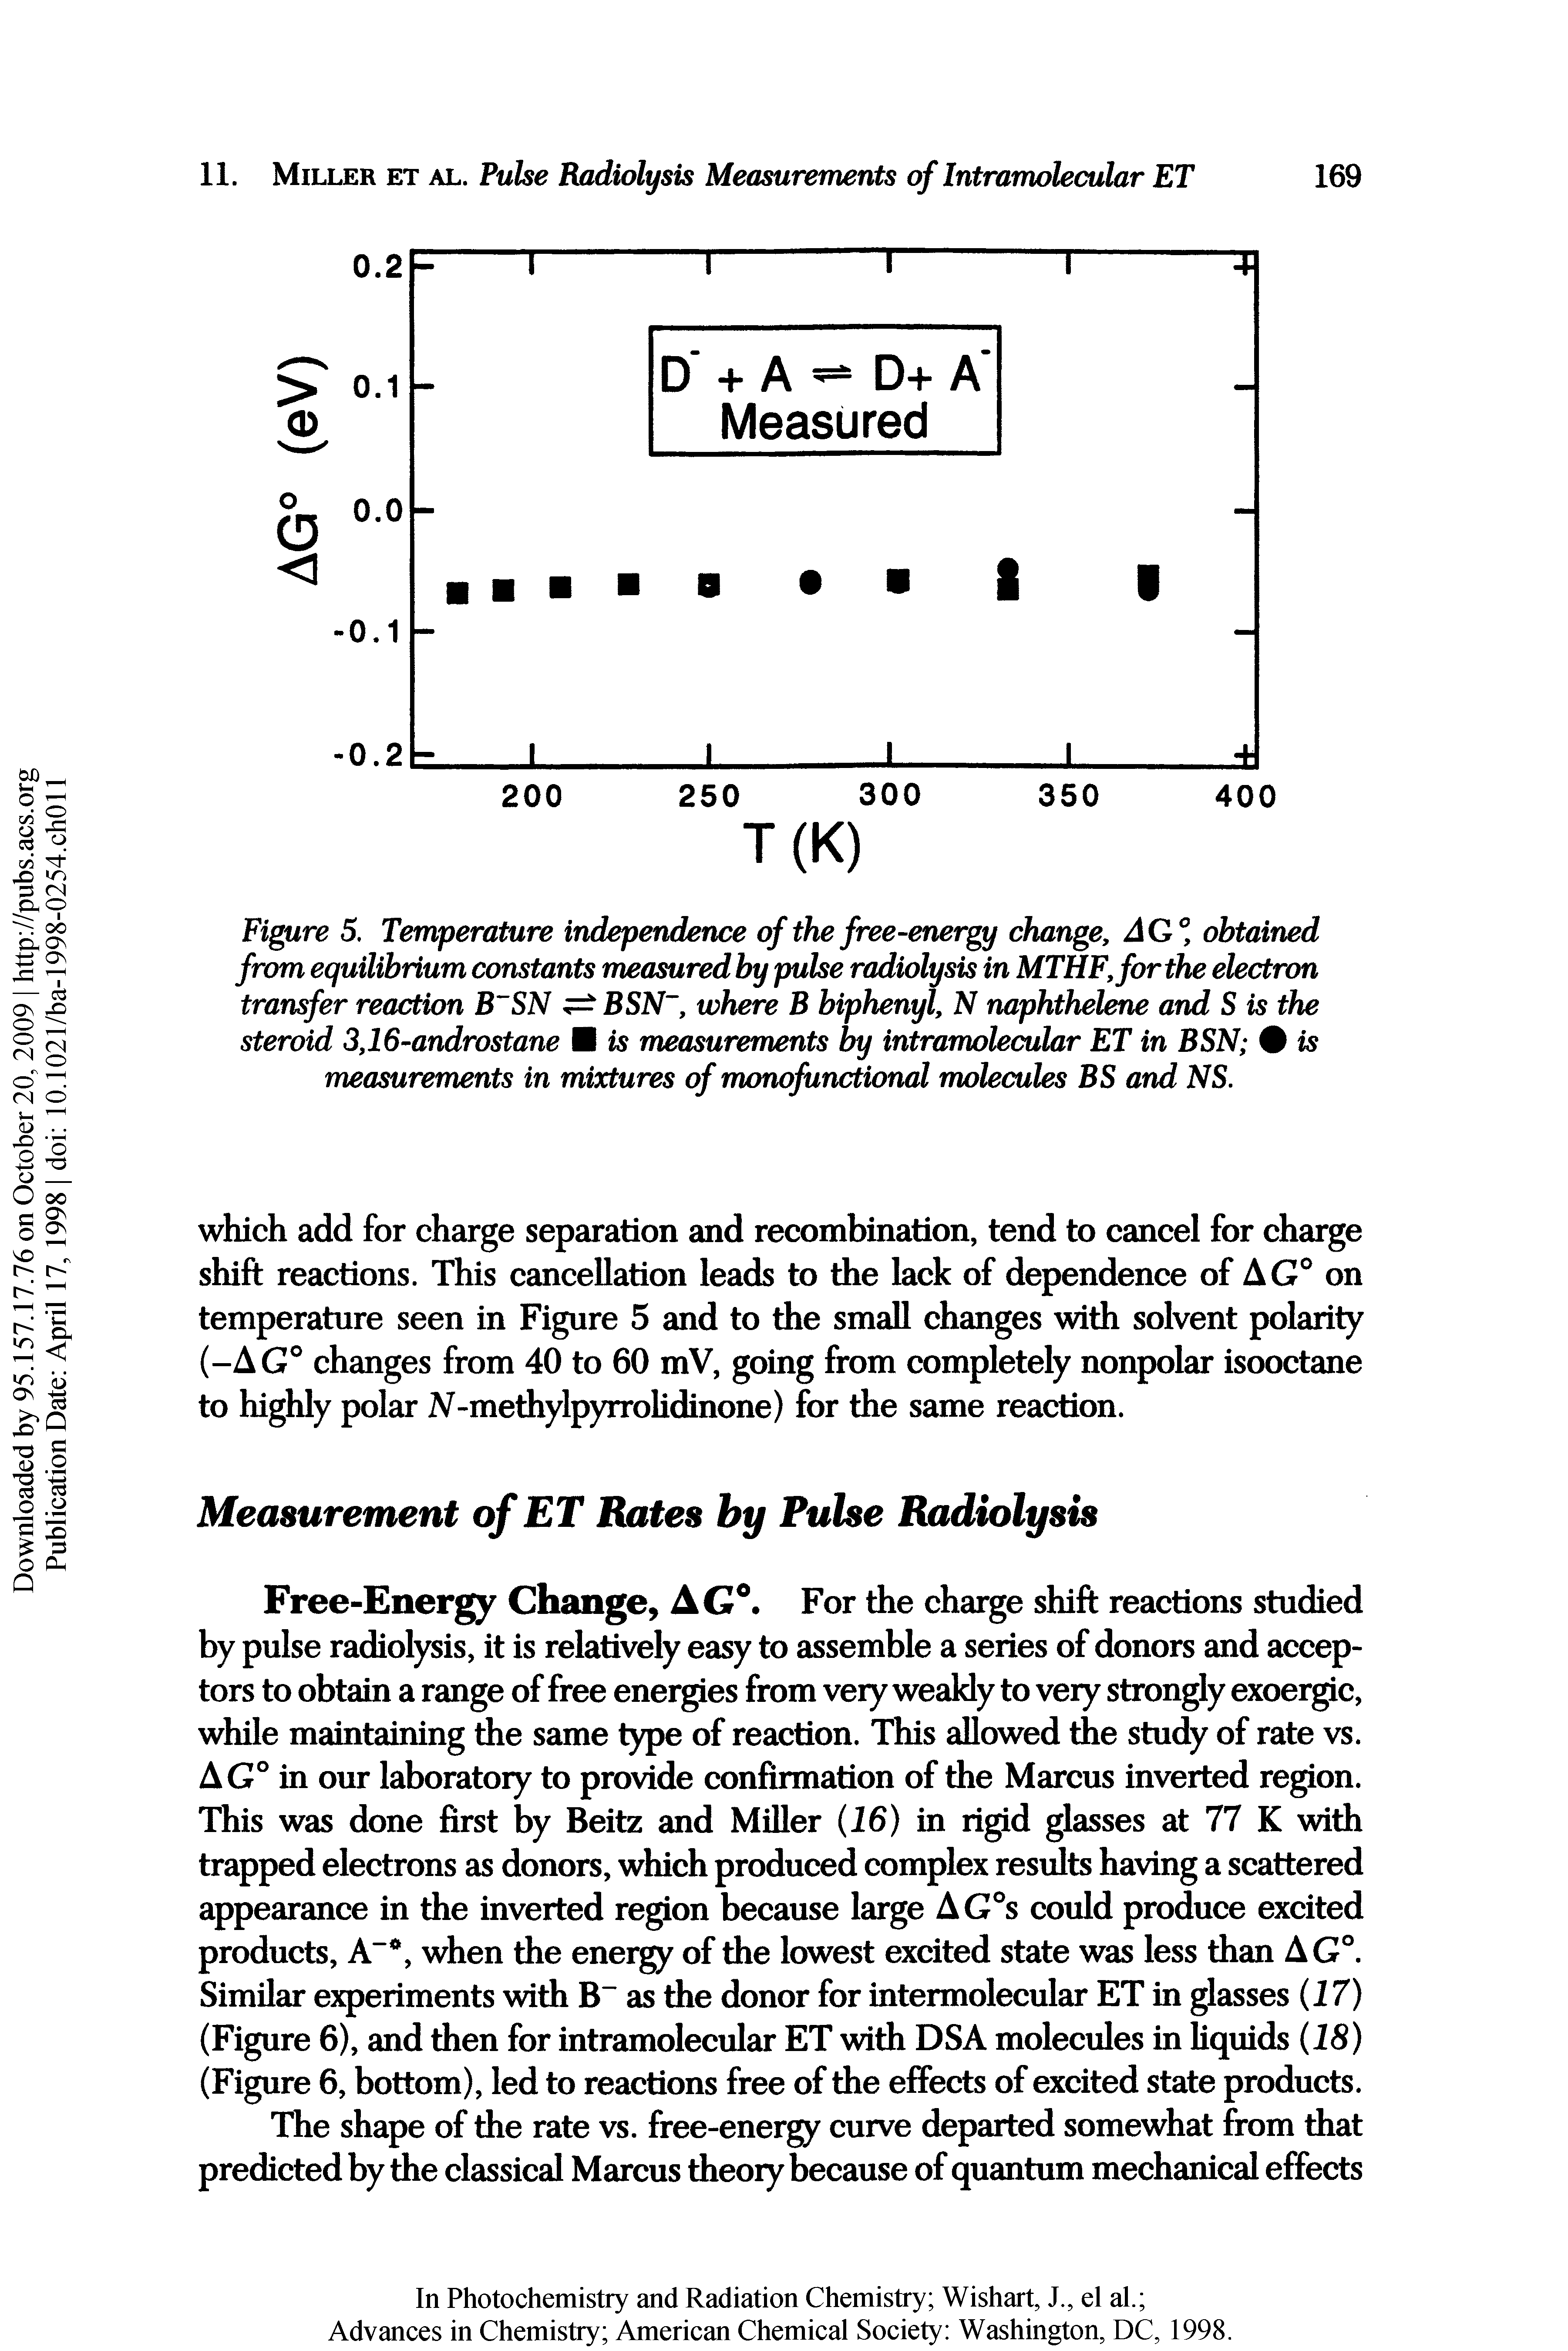 Figure 5. Temperature independence of the free-energy change, AQ° obtained from equilibrium constants measured by pulse radiolysis in MTHF,forthe electron transfer reaction B SN BSN, where B biphenyl, N naphthel and S is the steroid 3,16-androstane is measurements by intramolecular ET in BSN is measurements in mixtures of monofunctional molecules BS and NS.